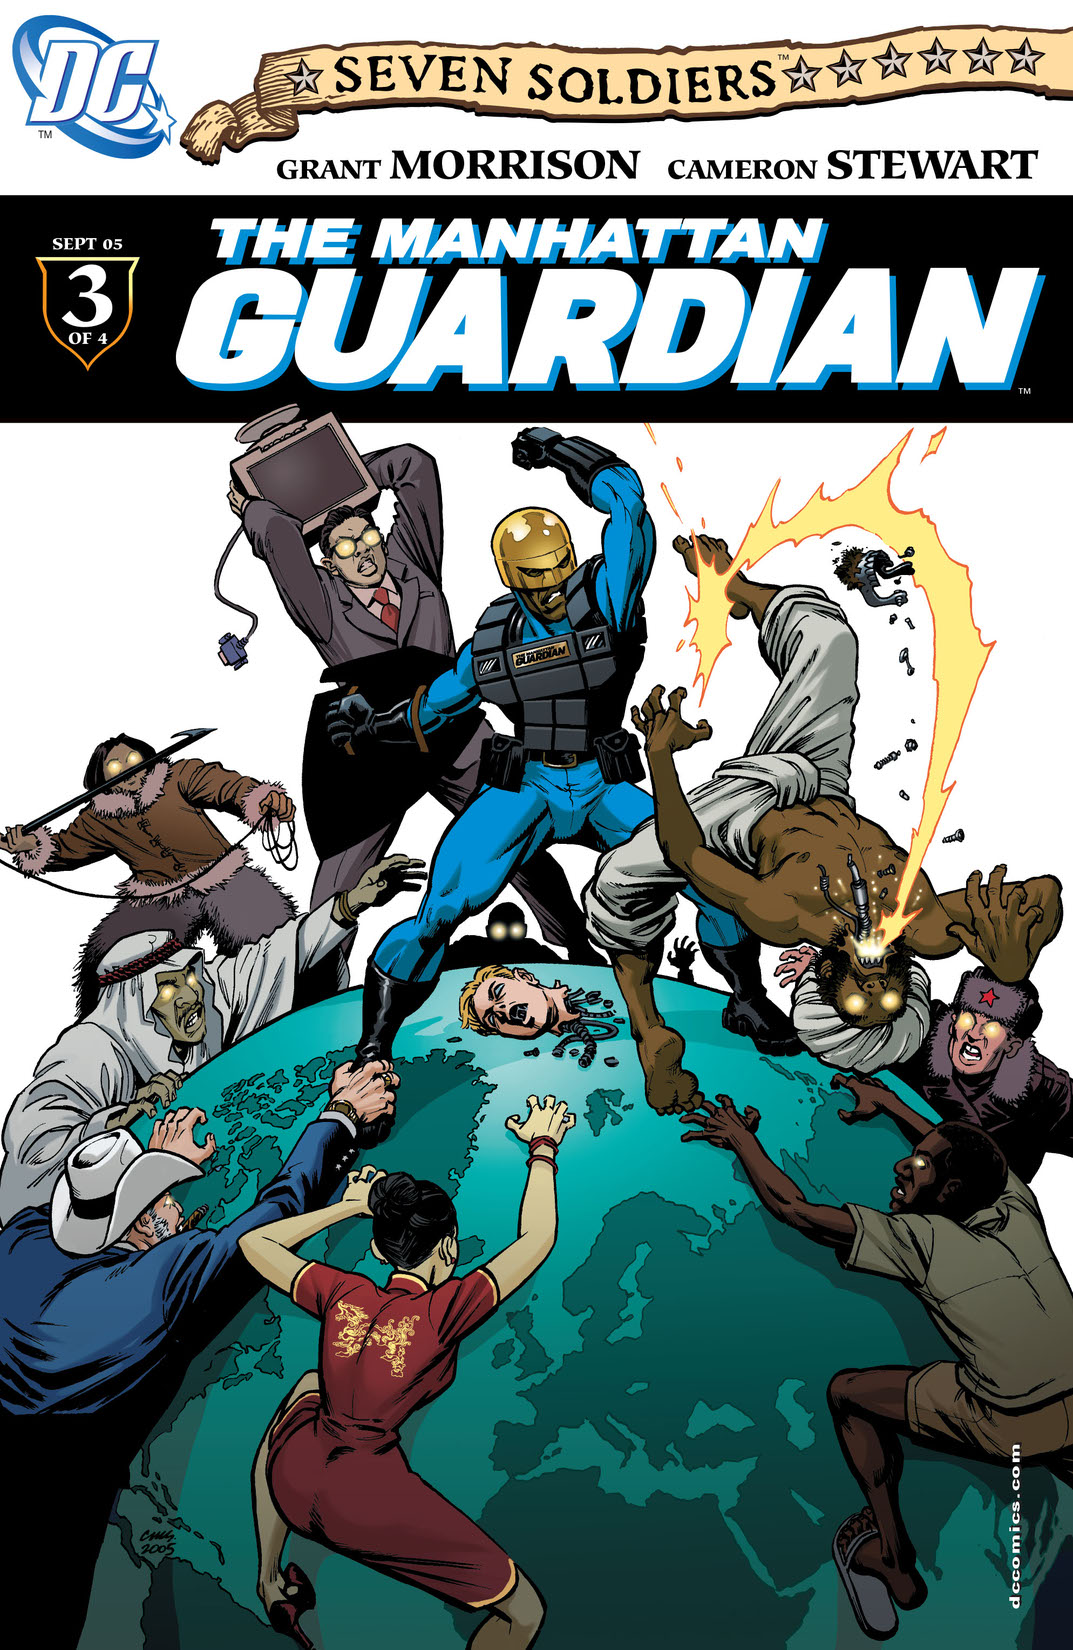 Seven Soldiers: The Manhattan Guardian #3 preview images